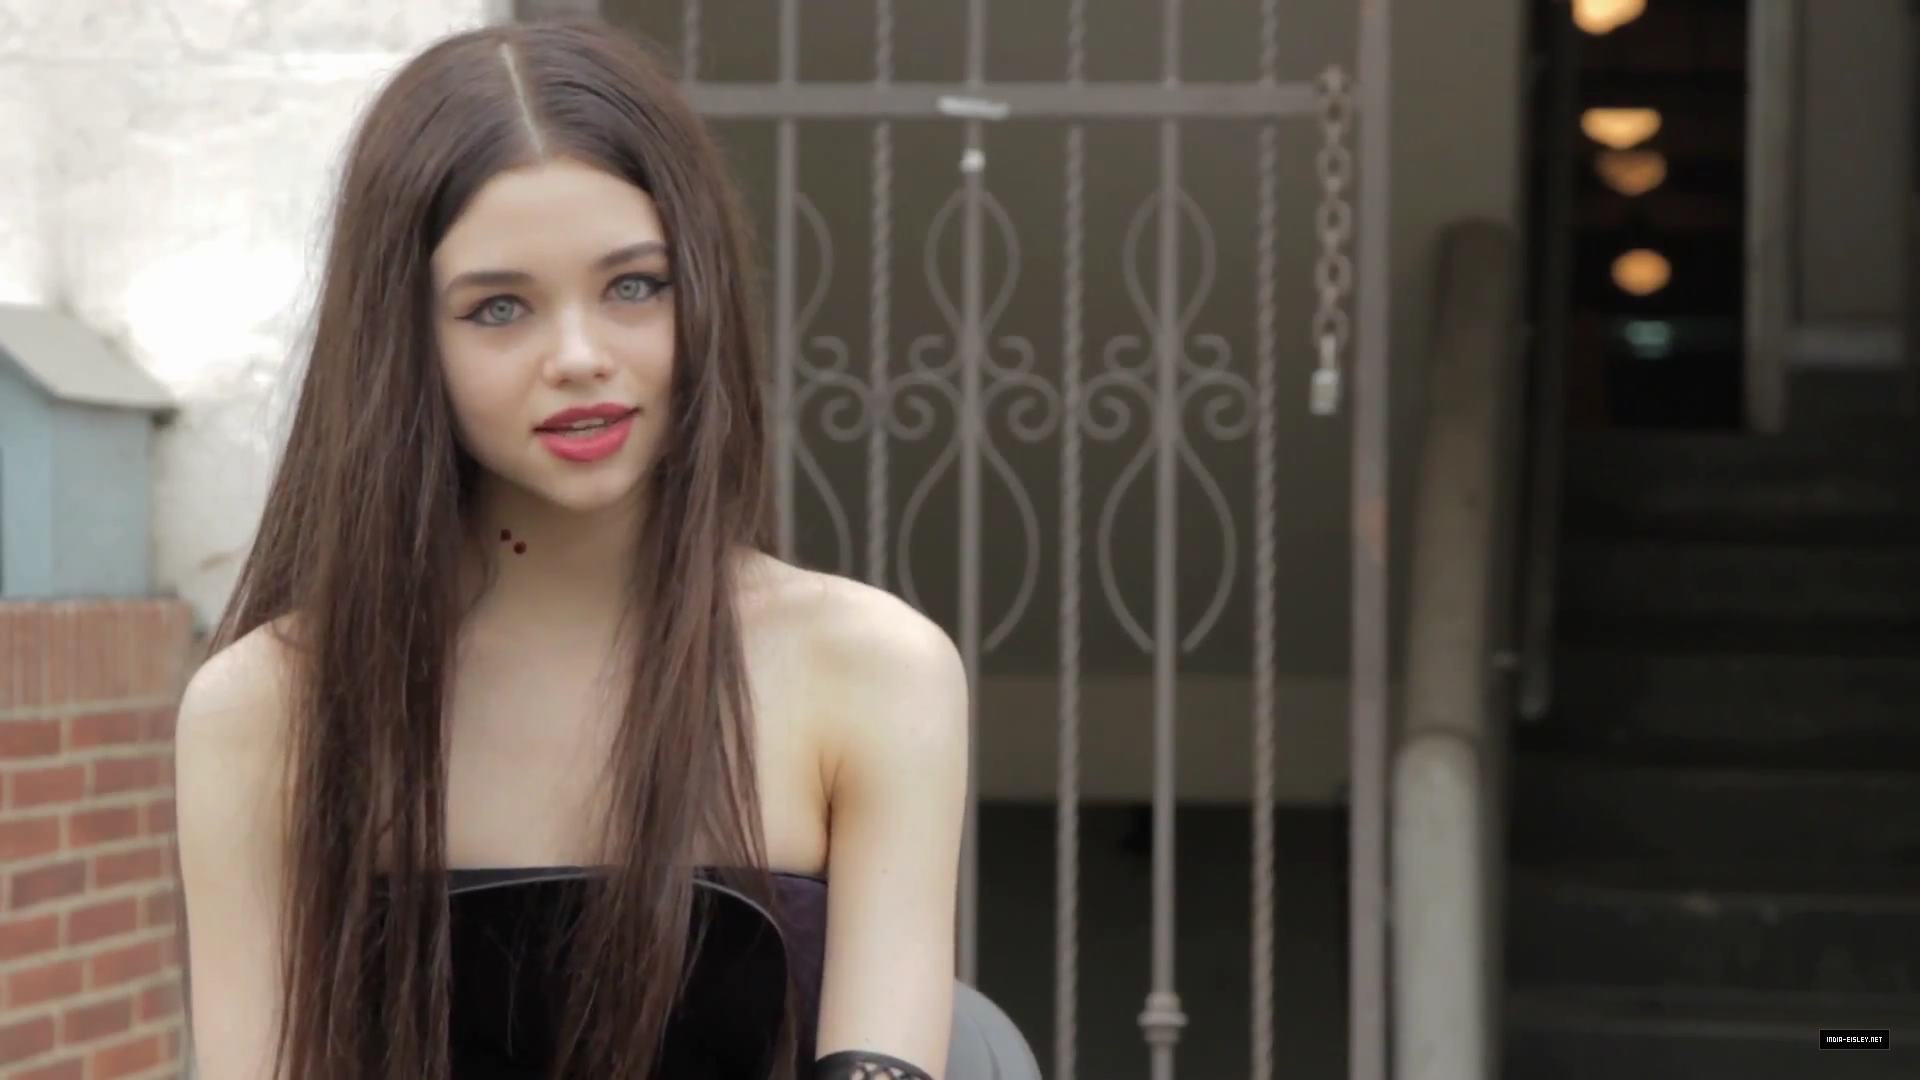 India eisley images and wallpapers. 